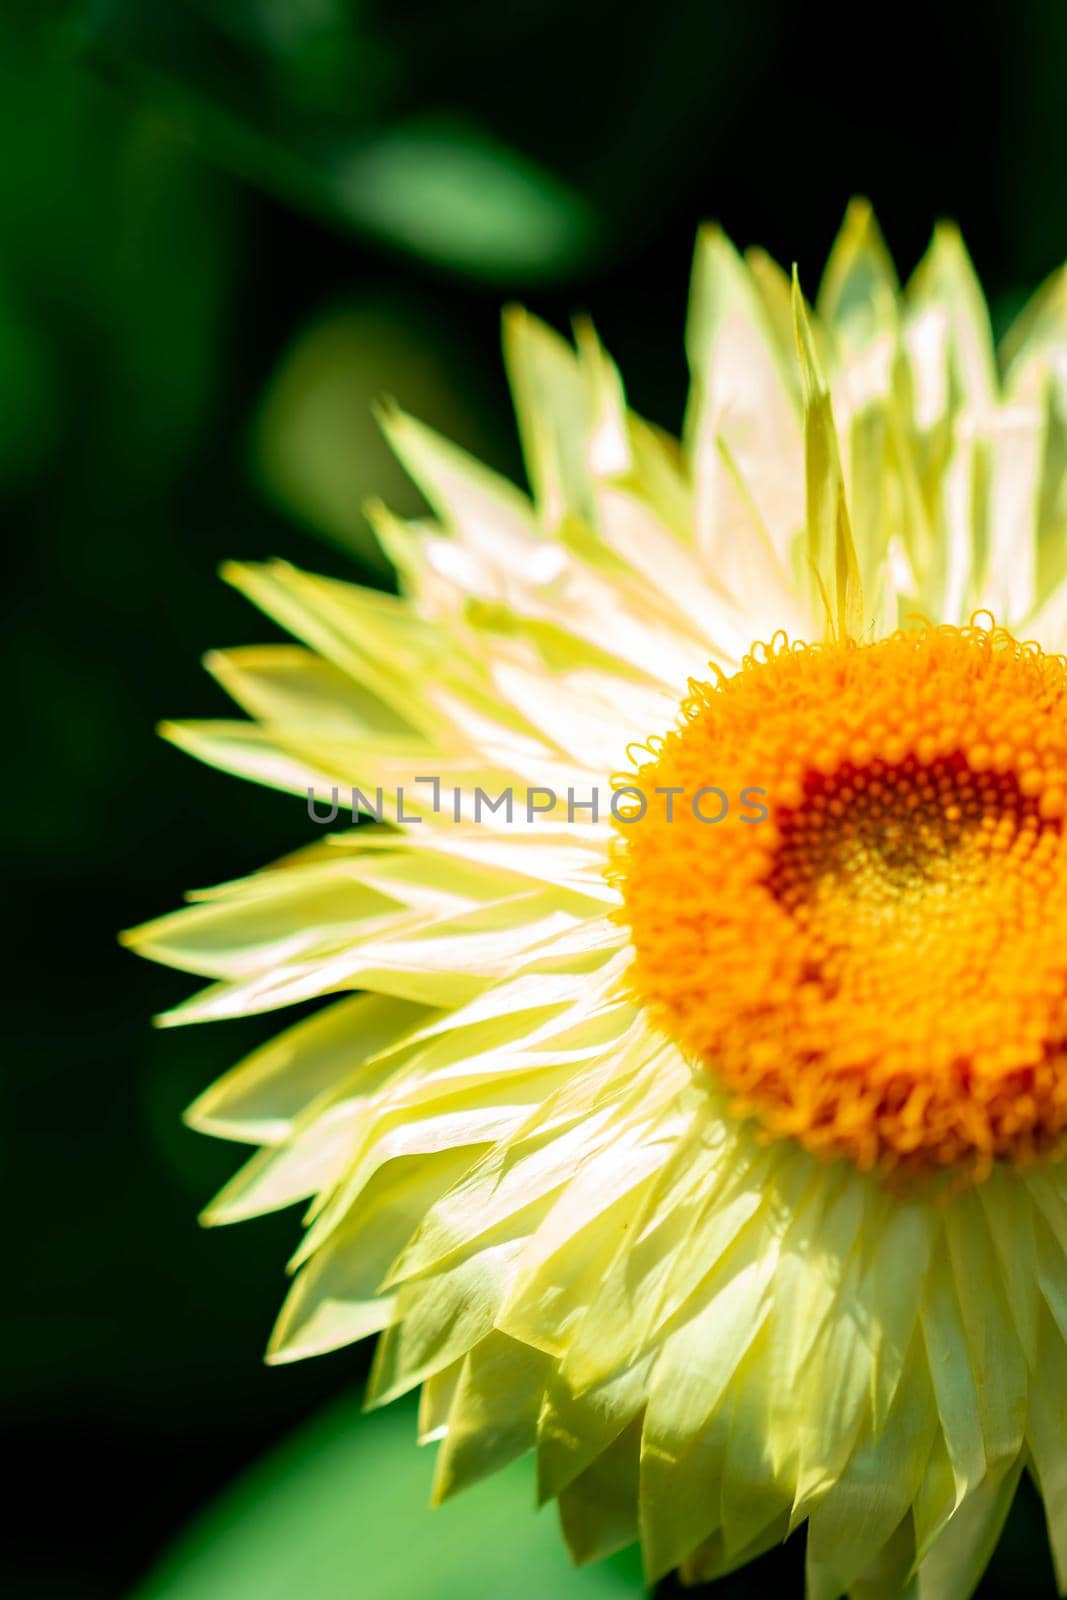 Vertical closeup shot of a yellow flower cut in half with a soft blurry green background image with some room for text